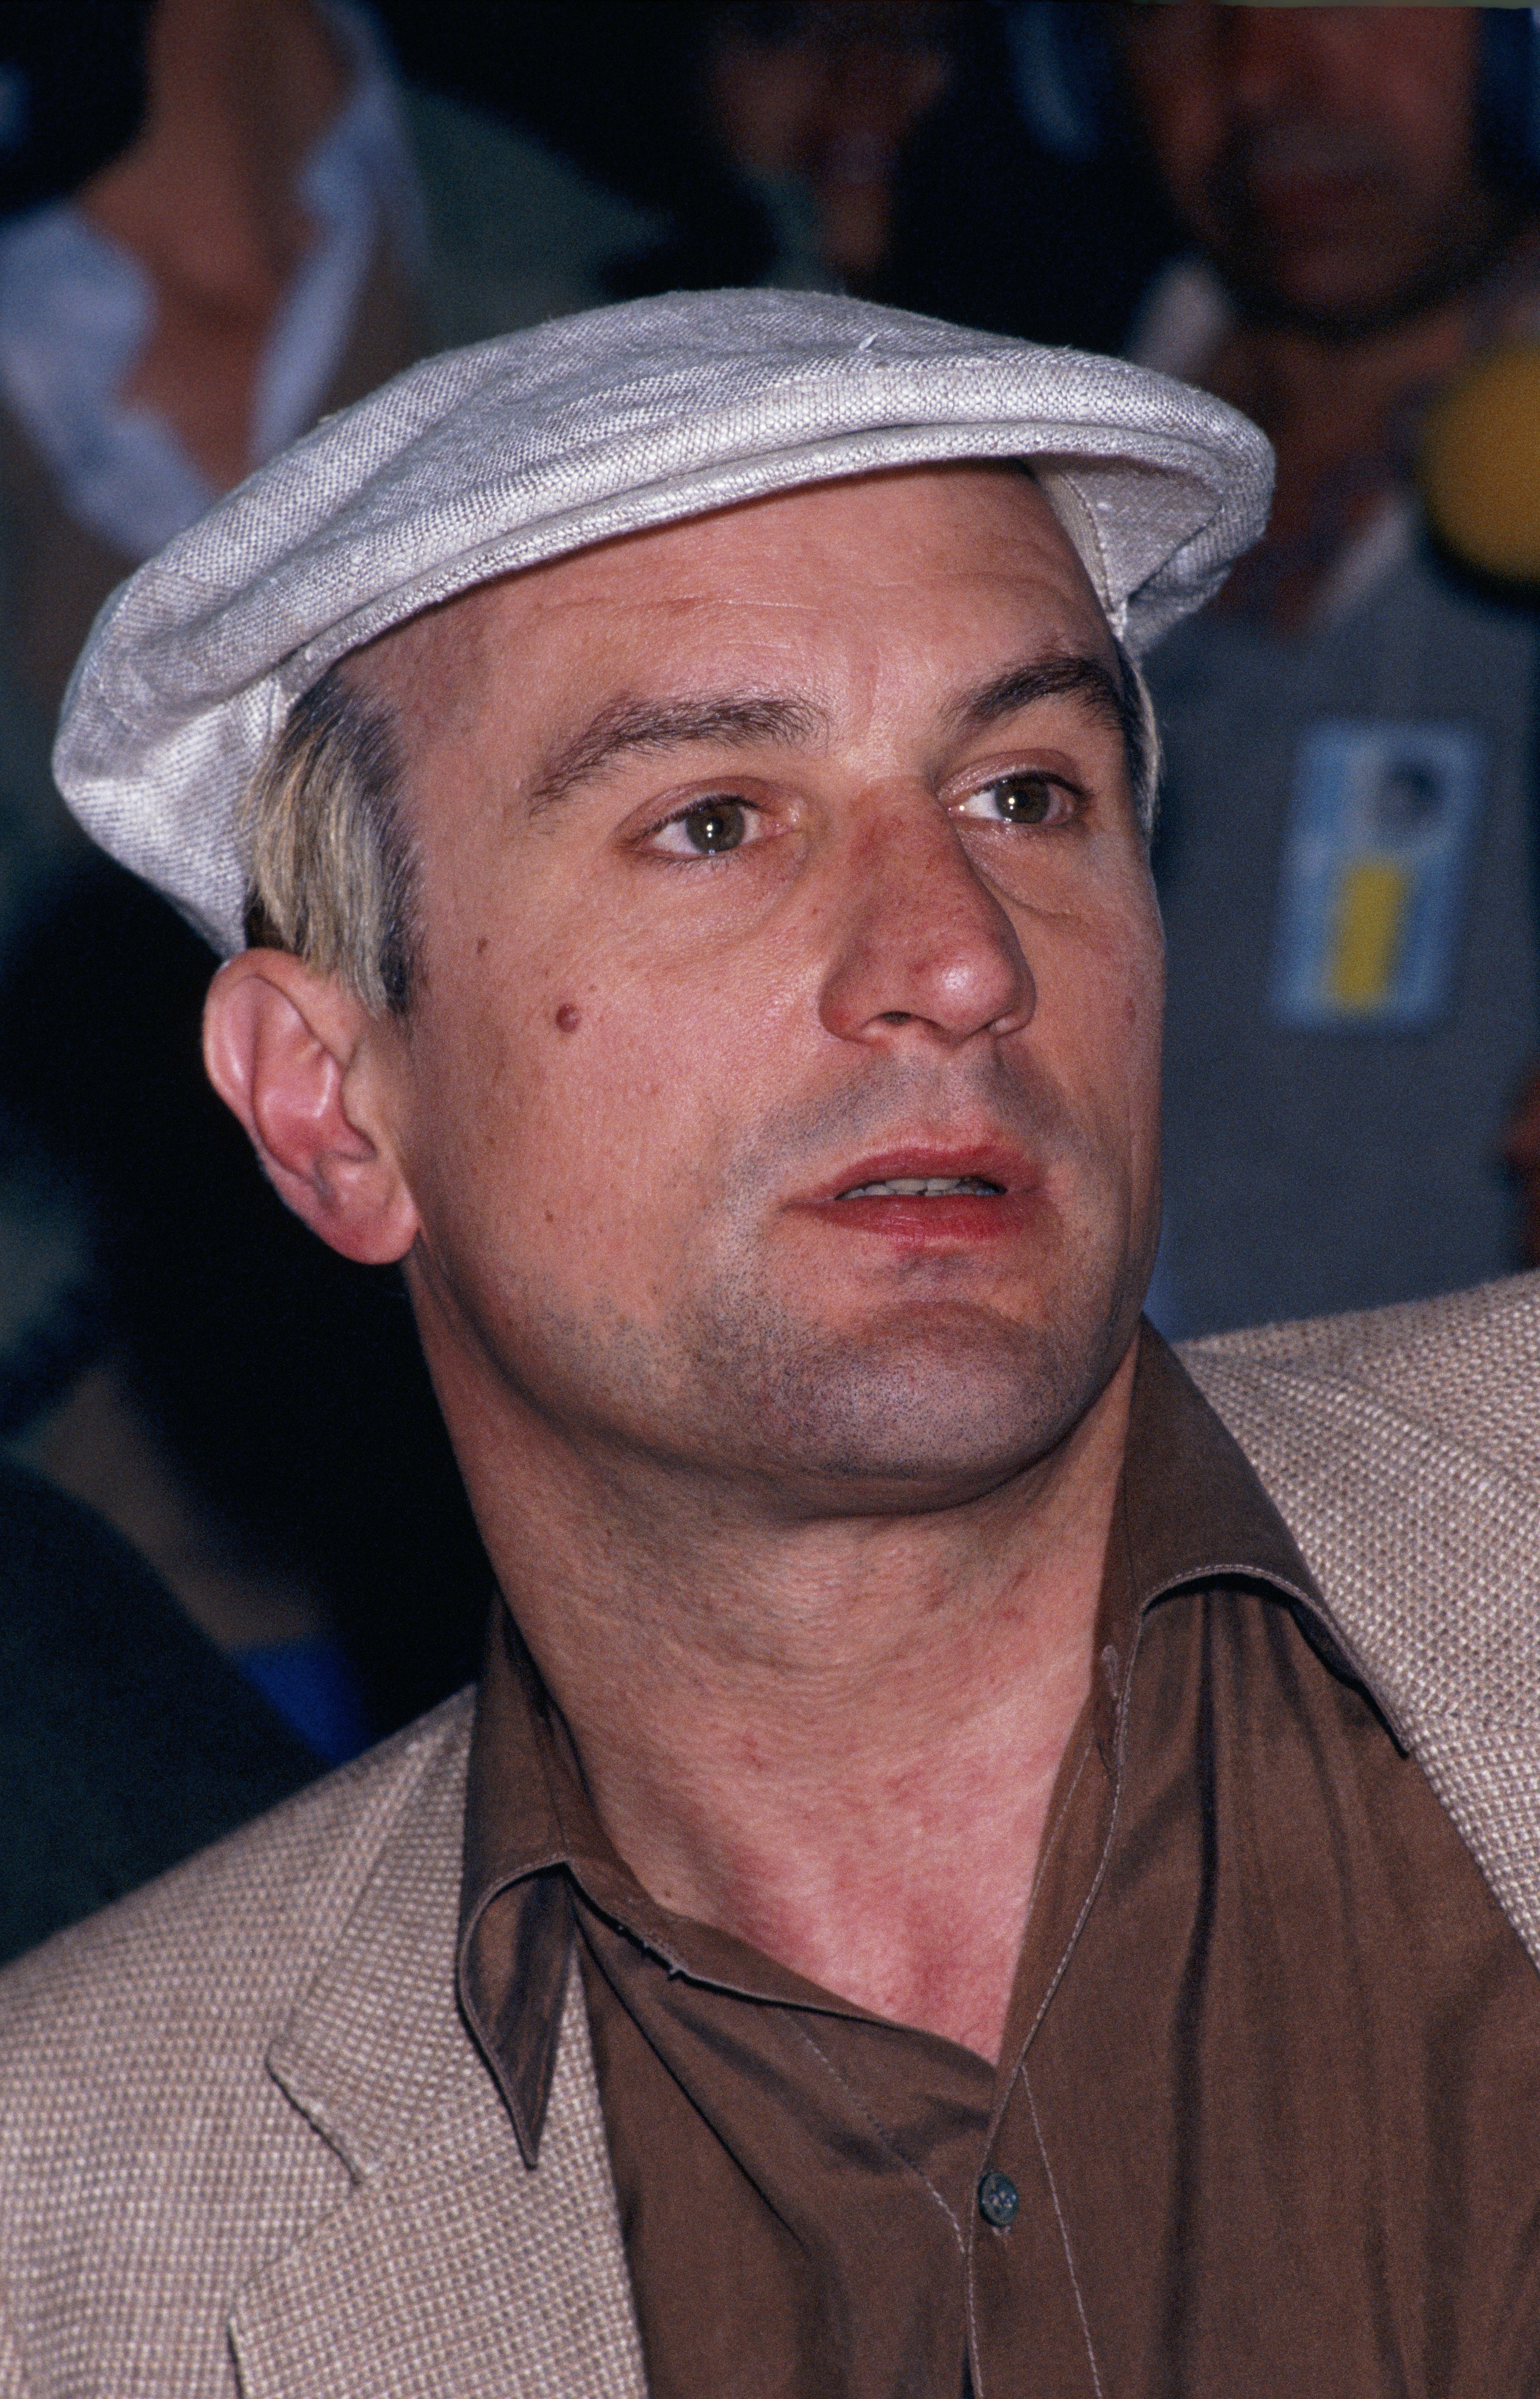 Robert de Niro at the Cannes Film Festival on May 5, 1984 | Source: Getty Images